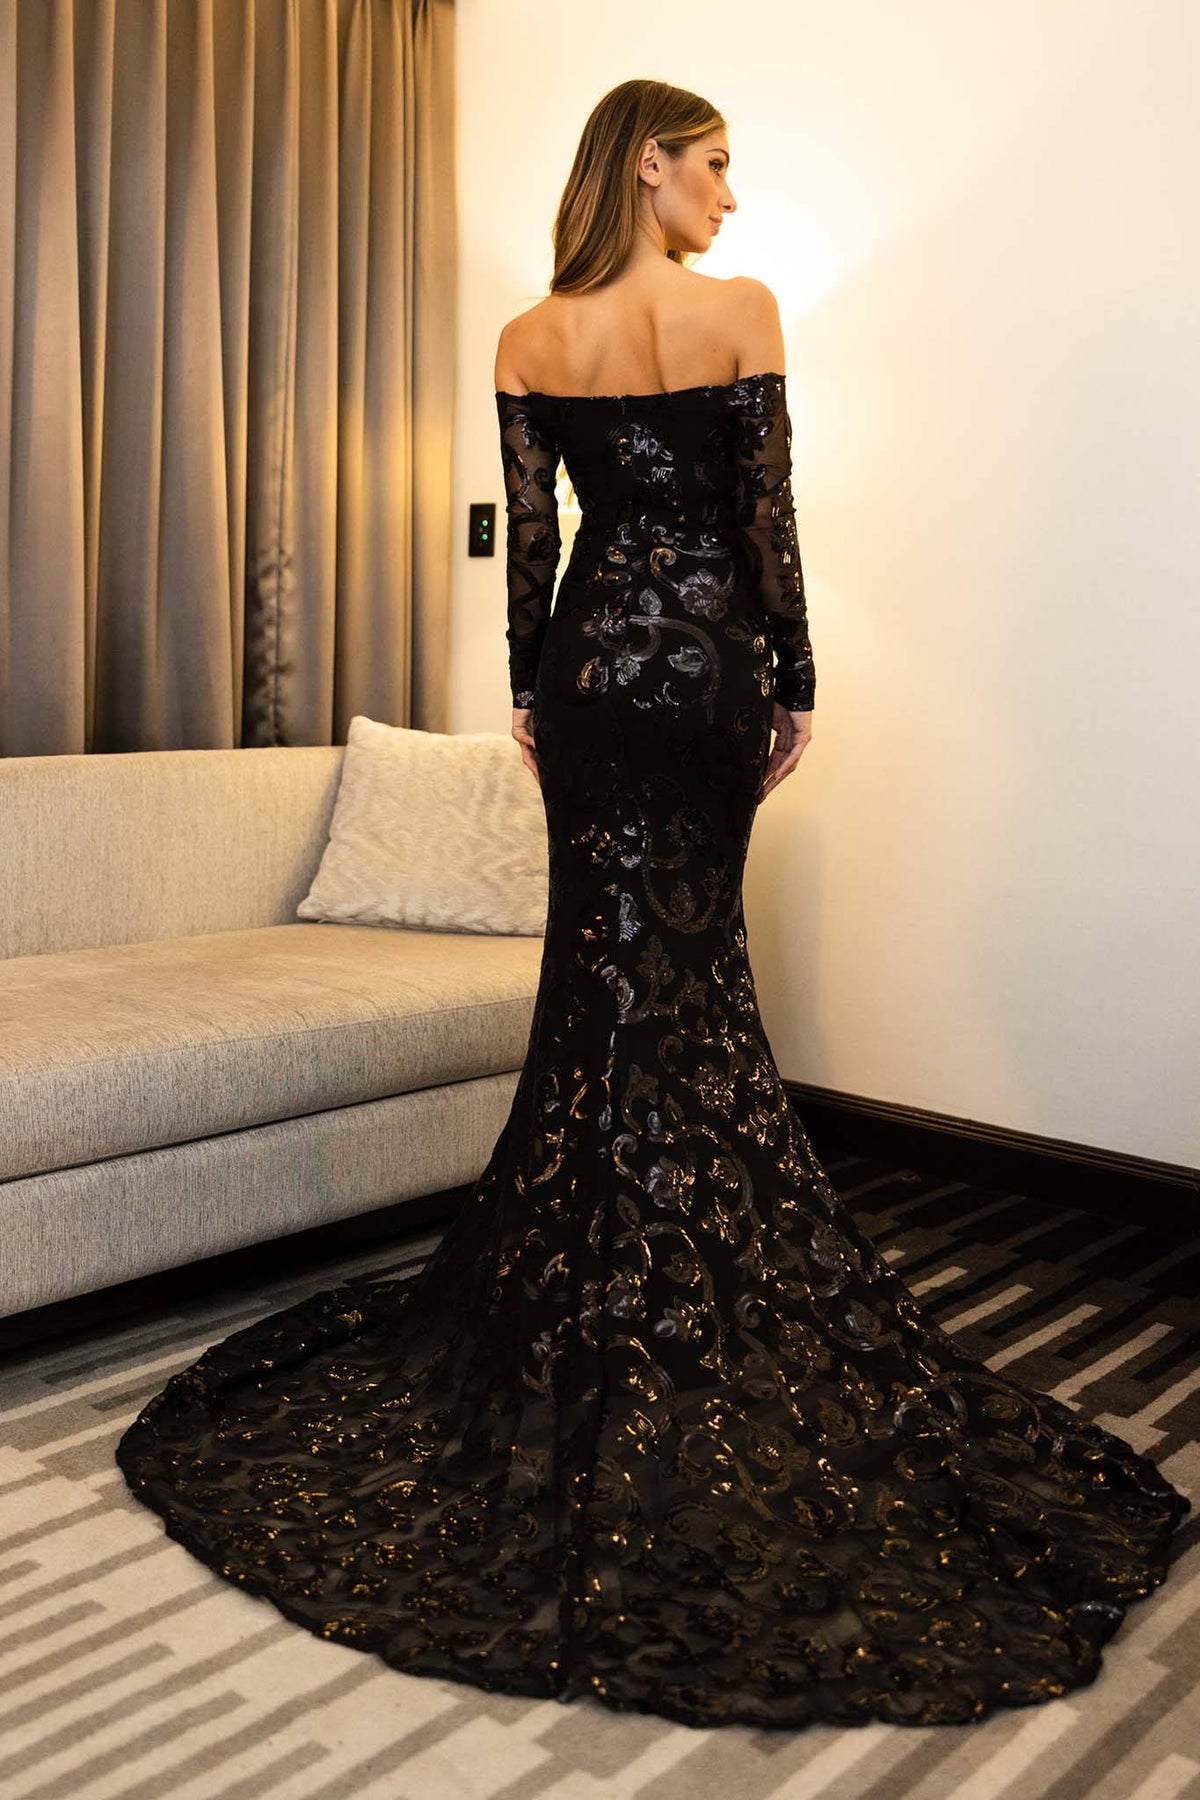 Sweep train and open shoulder design of Black sequin full length evening gown featuring vine pattern embroidered sequins, off-the-shoulder neckline, fit & flare mermaid silhouette 